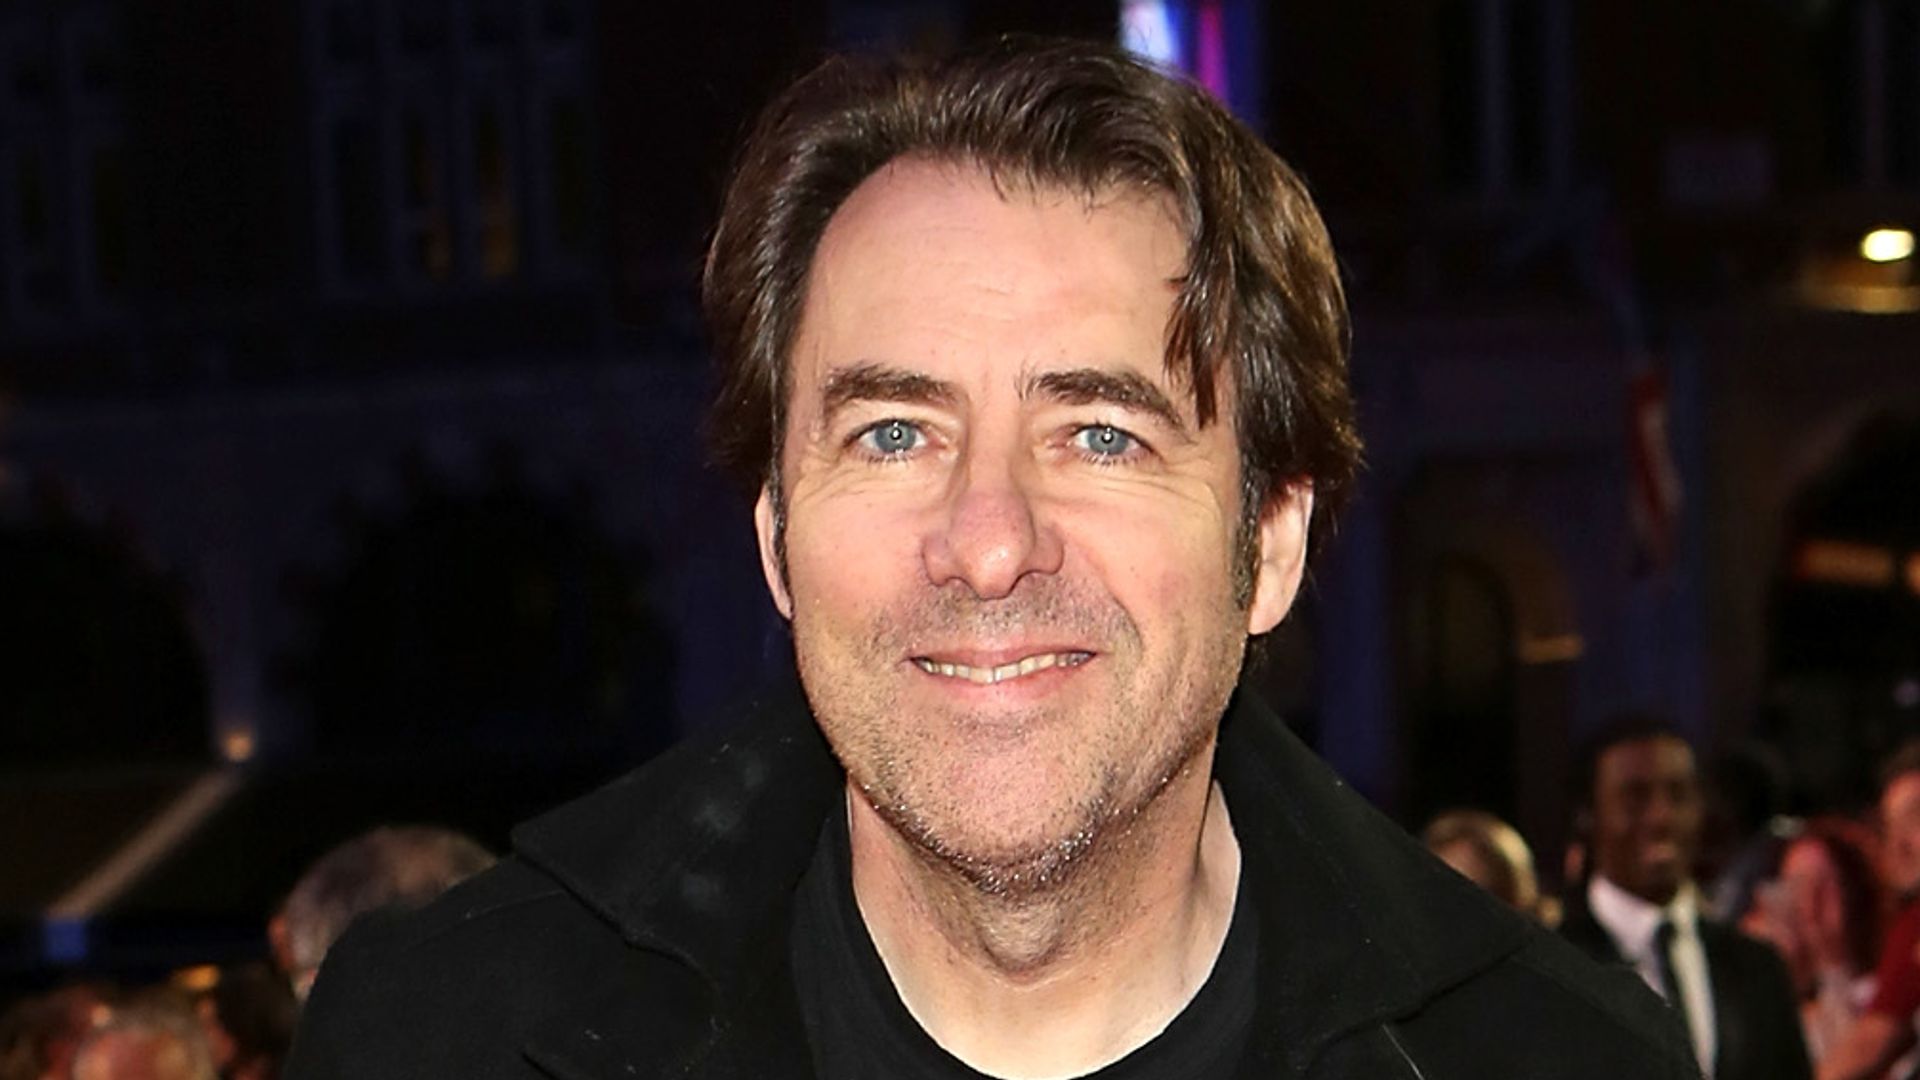 Jonathan Ross in a black outfit